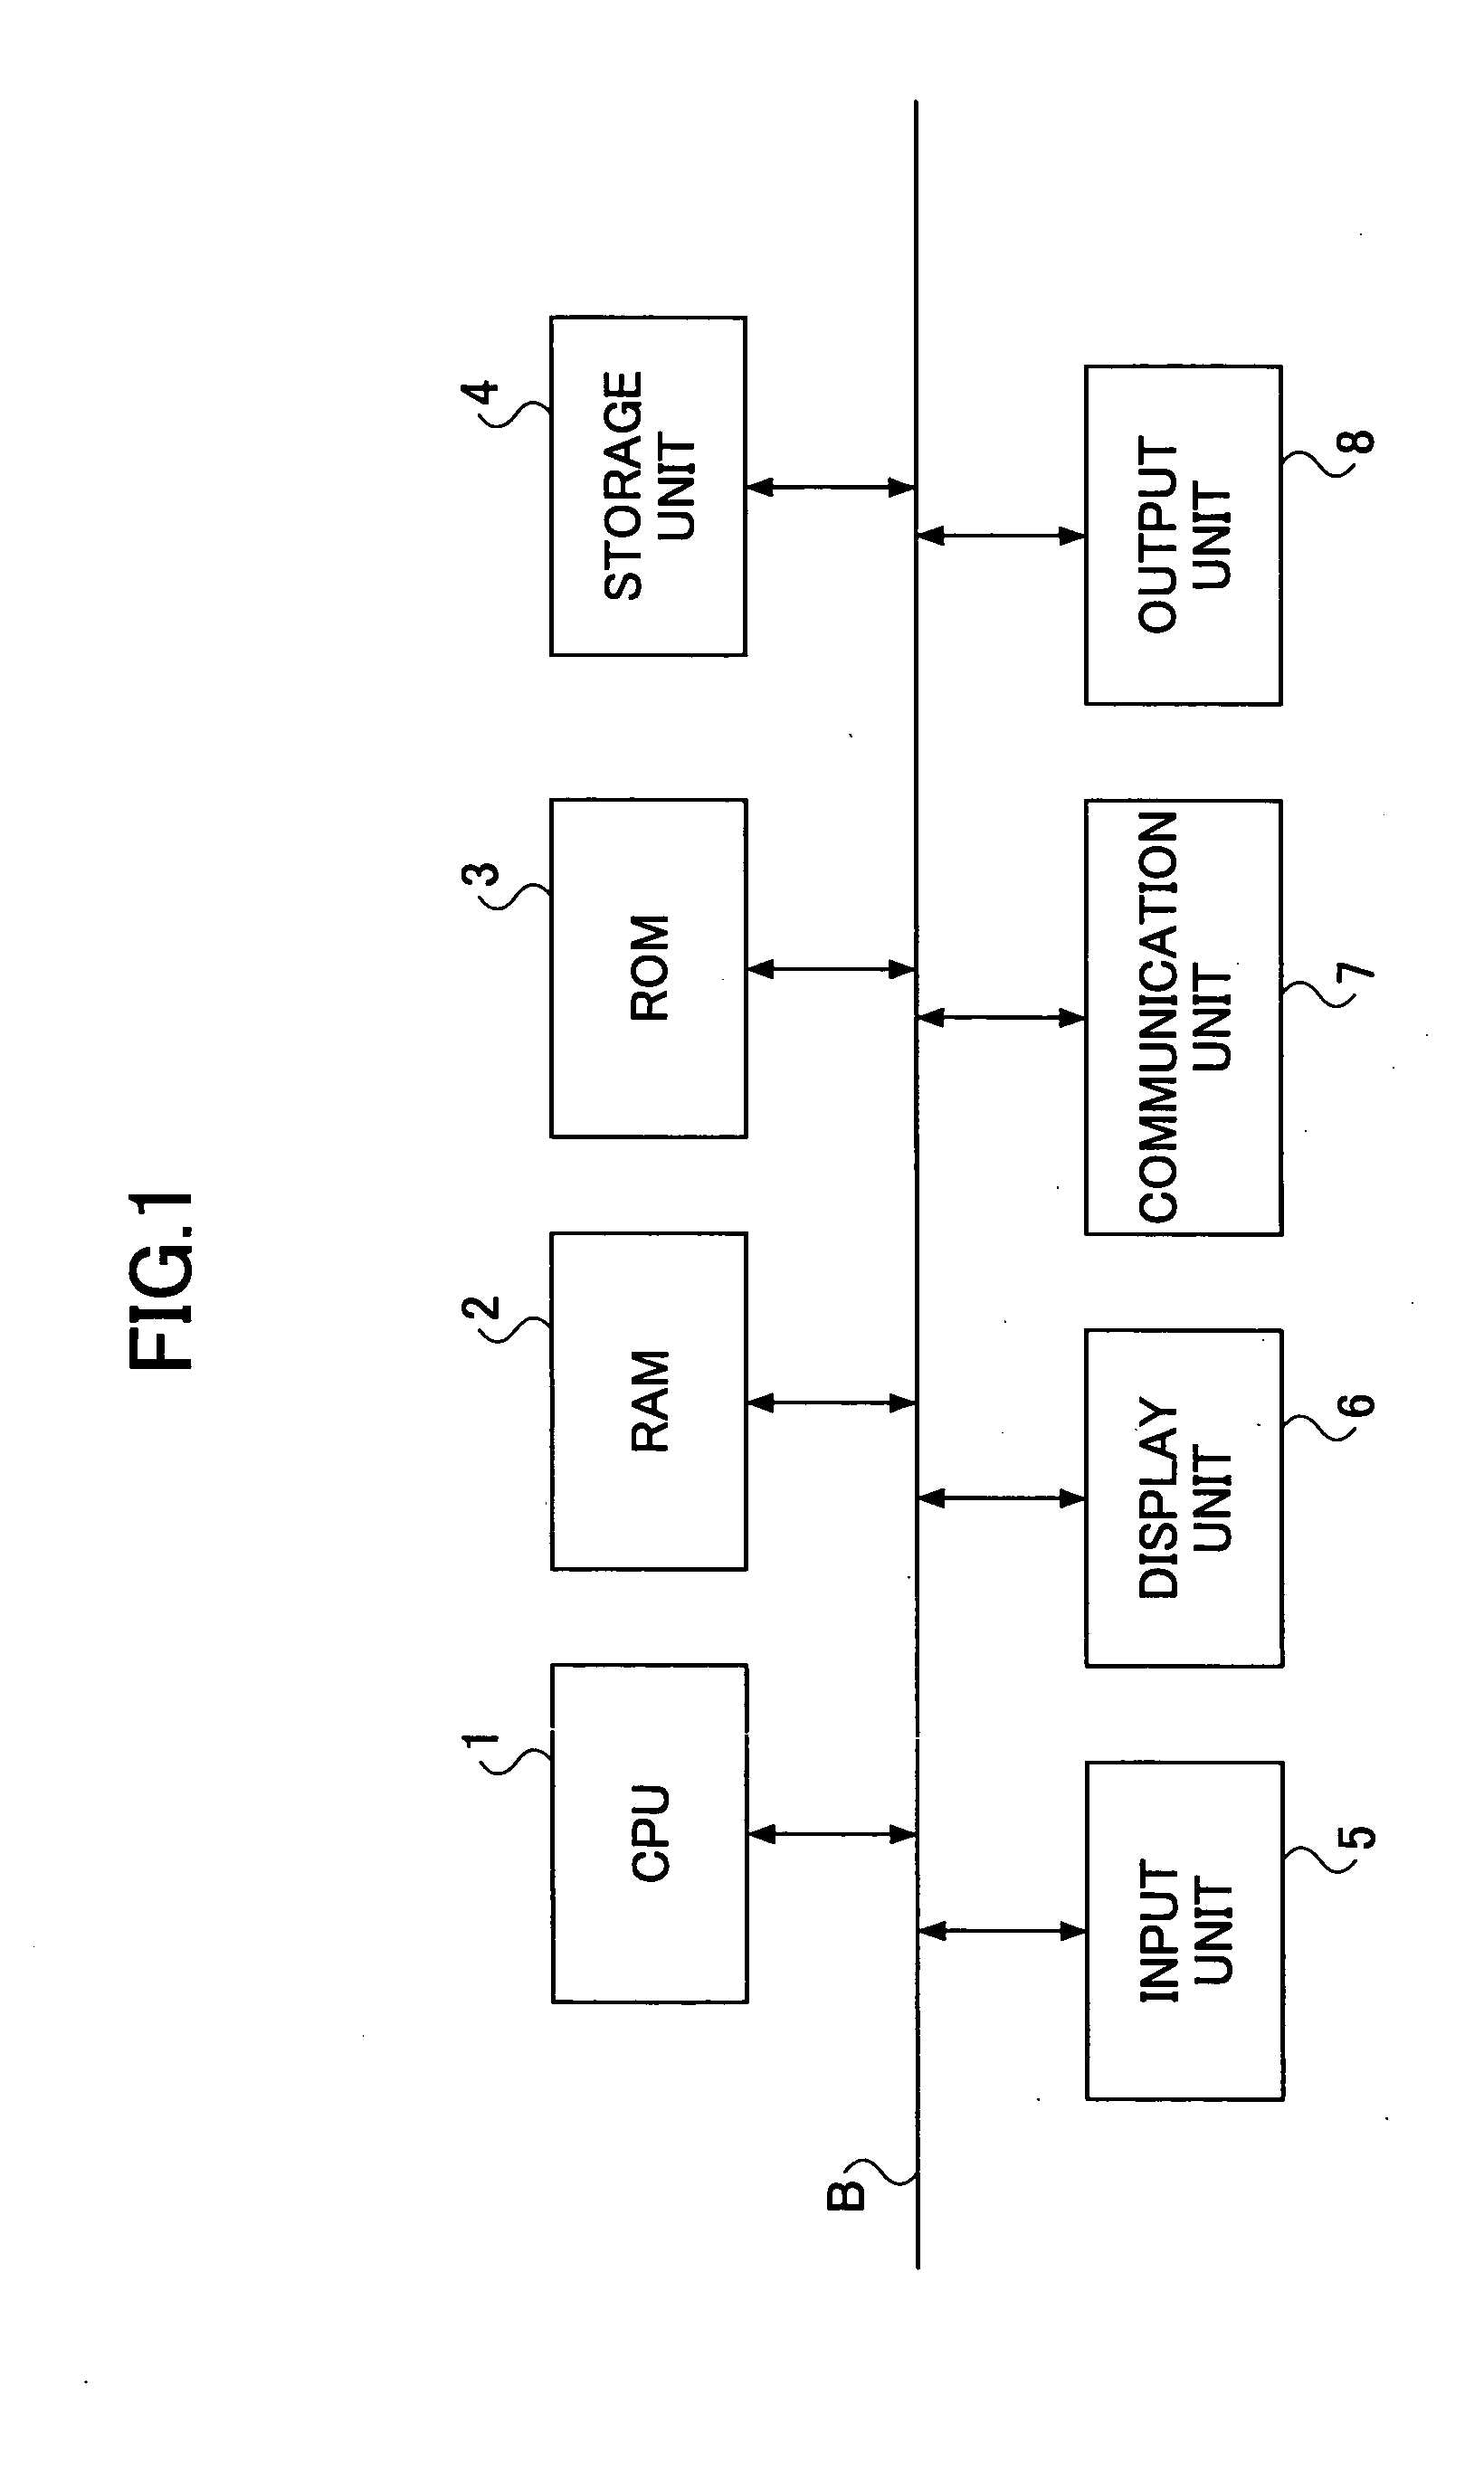 System, apparatus, and method for providing illegal use research service for image data, and system, apparatus, and method for providing proper use research service for image data